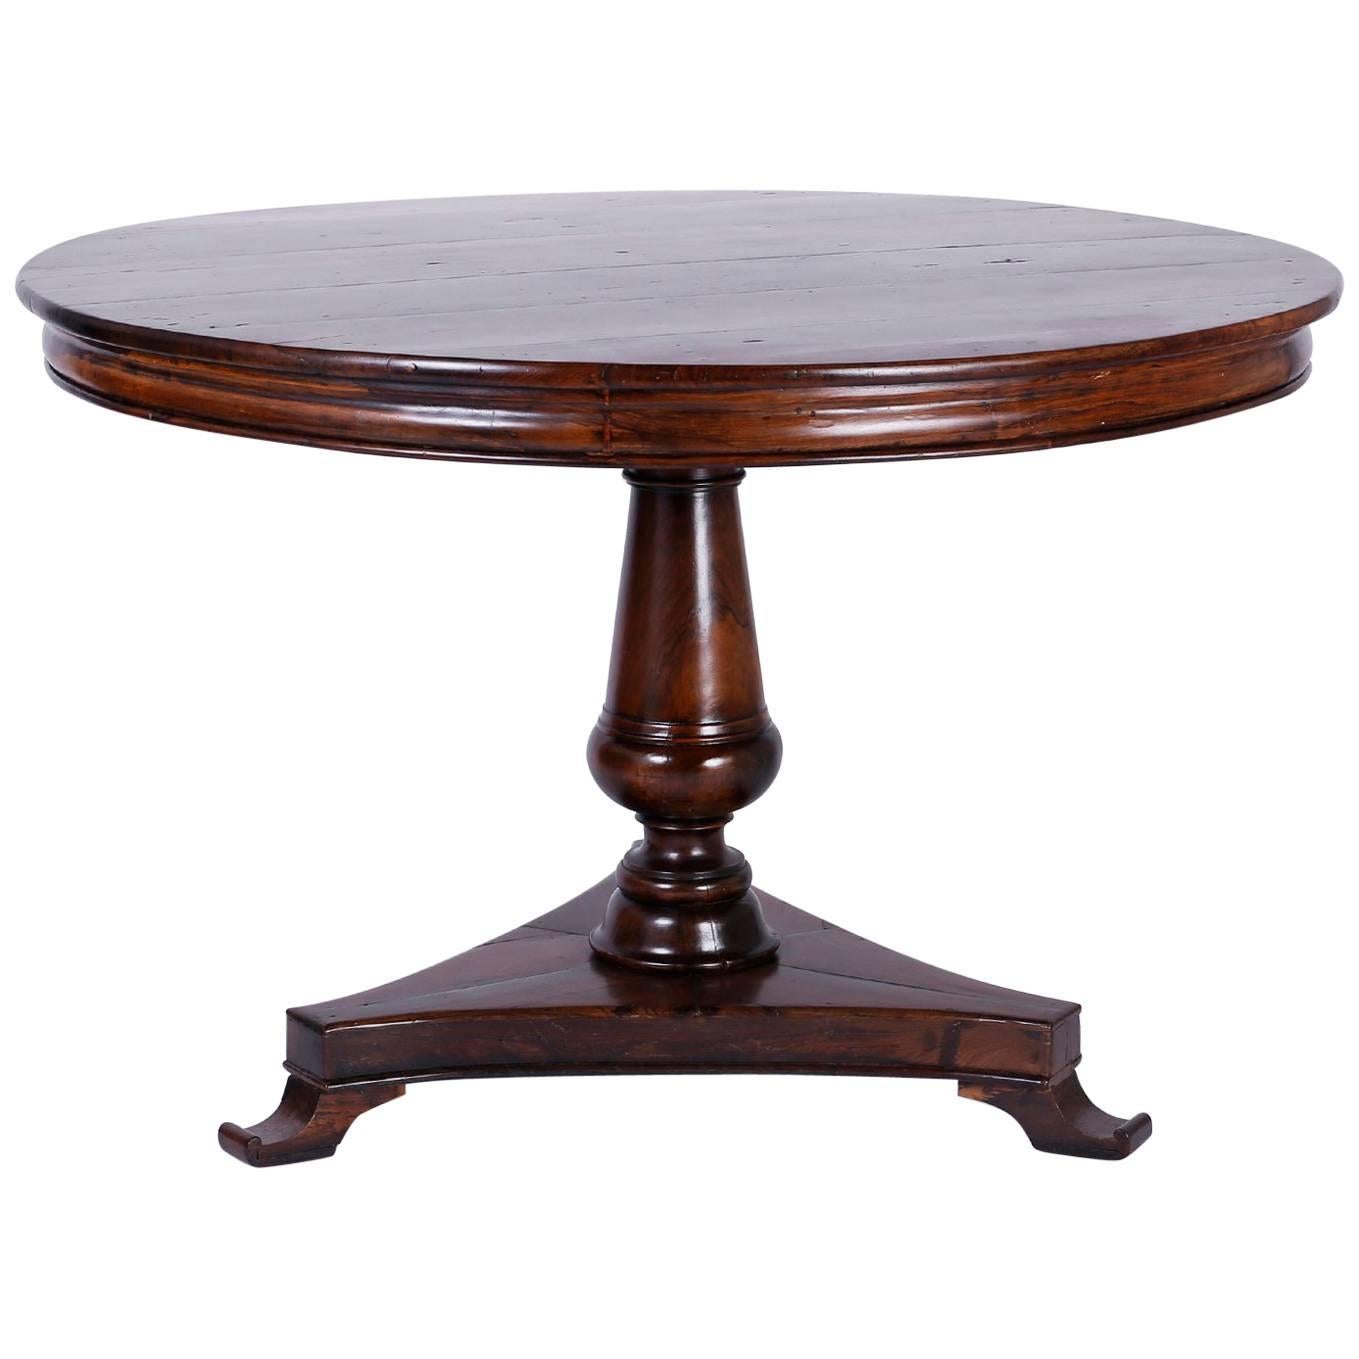 Anglo-Indian Dining or Center Table